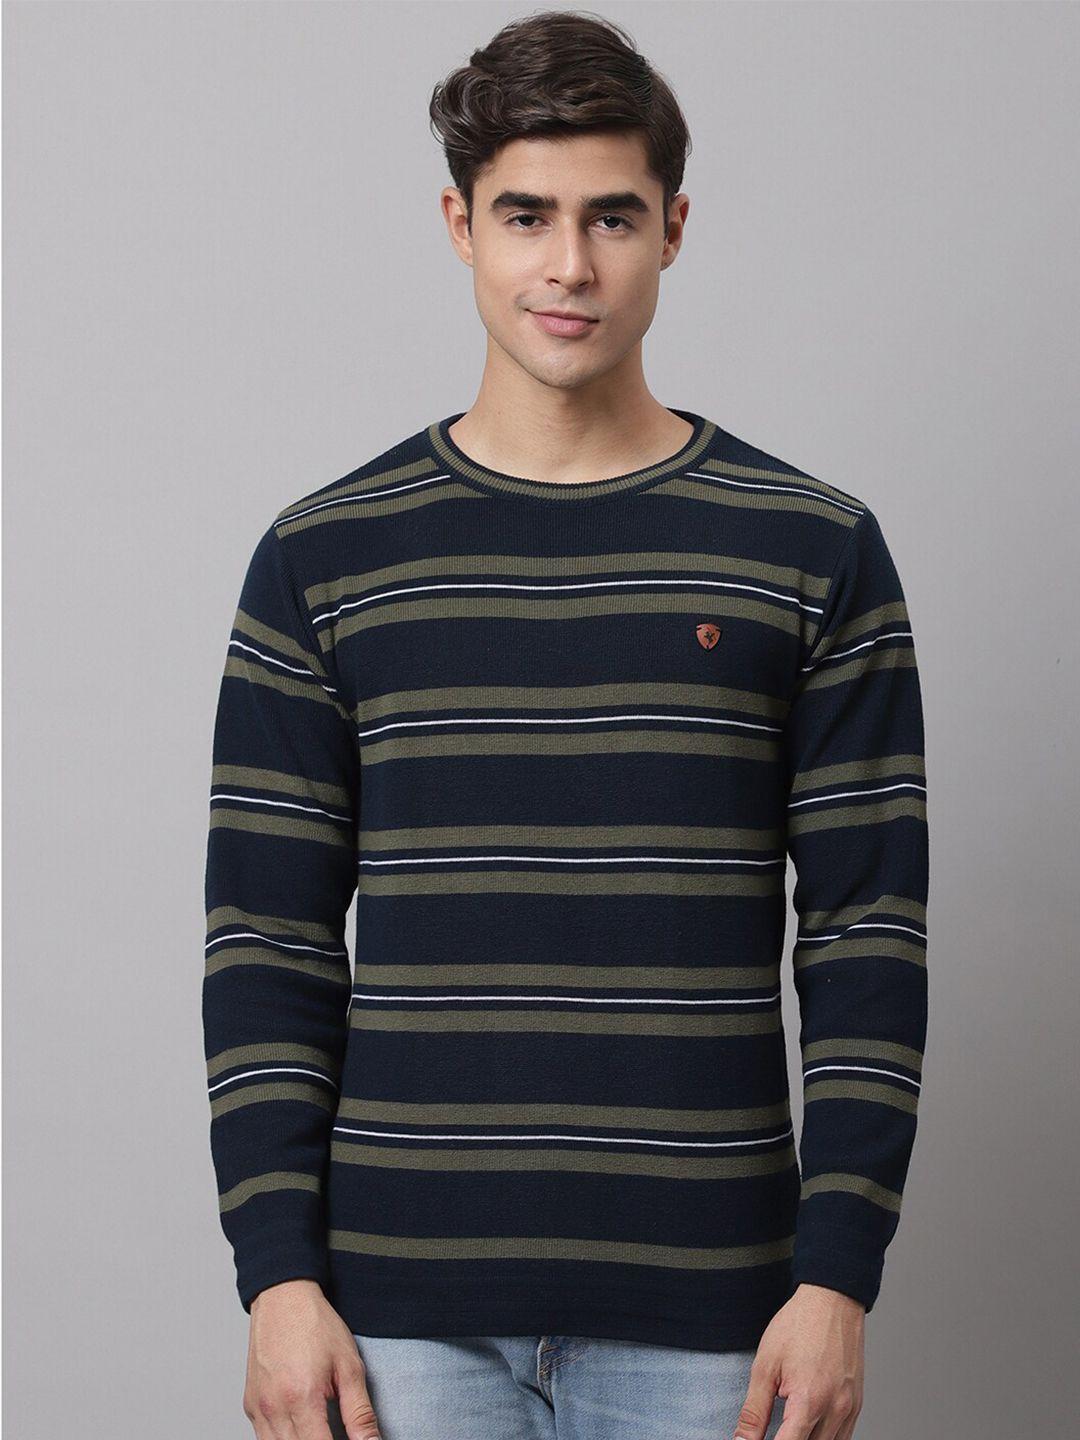 cantabil men olive green & navy blue striped striped pullover